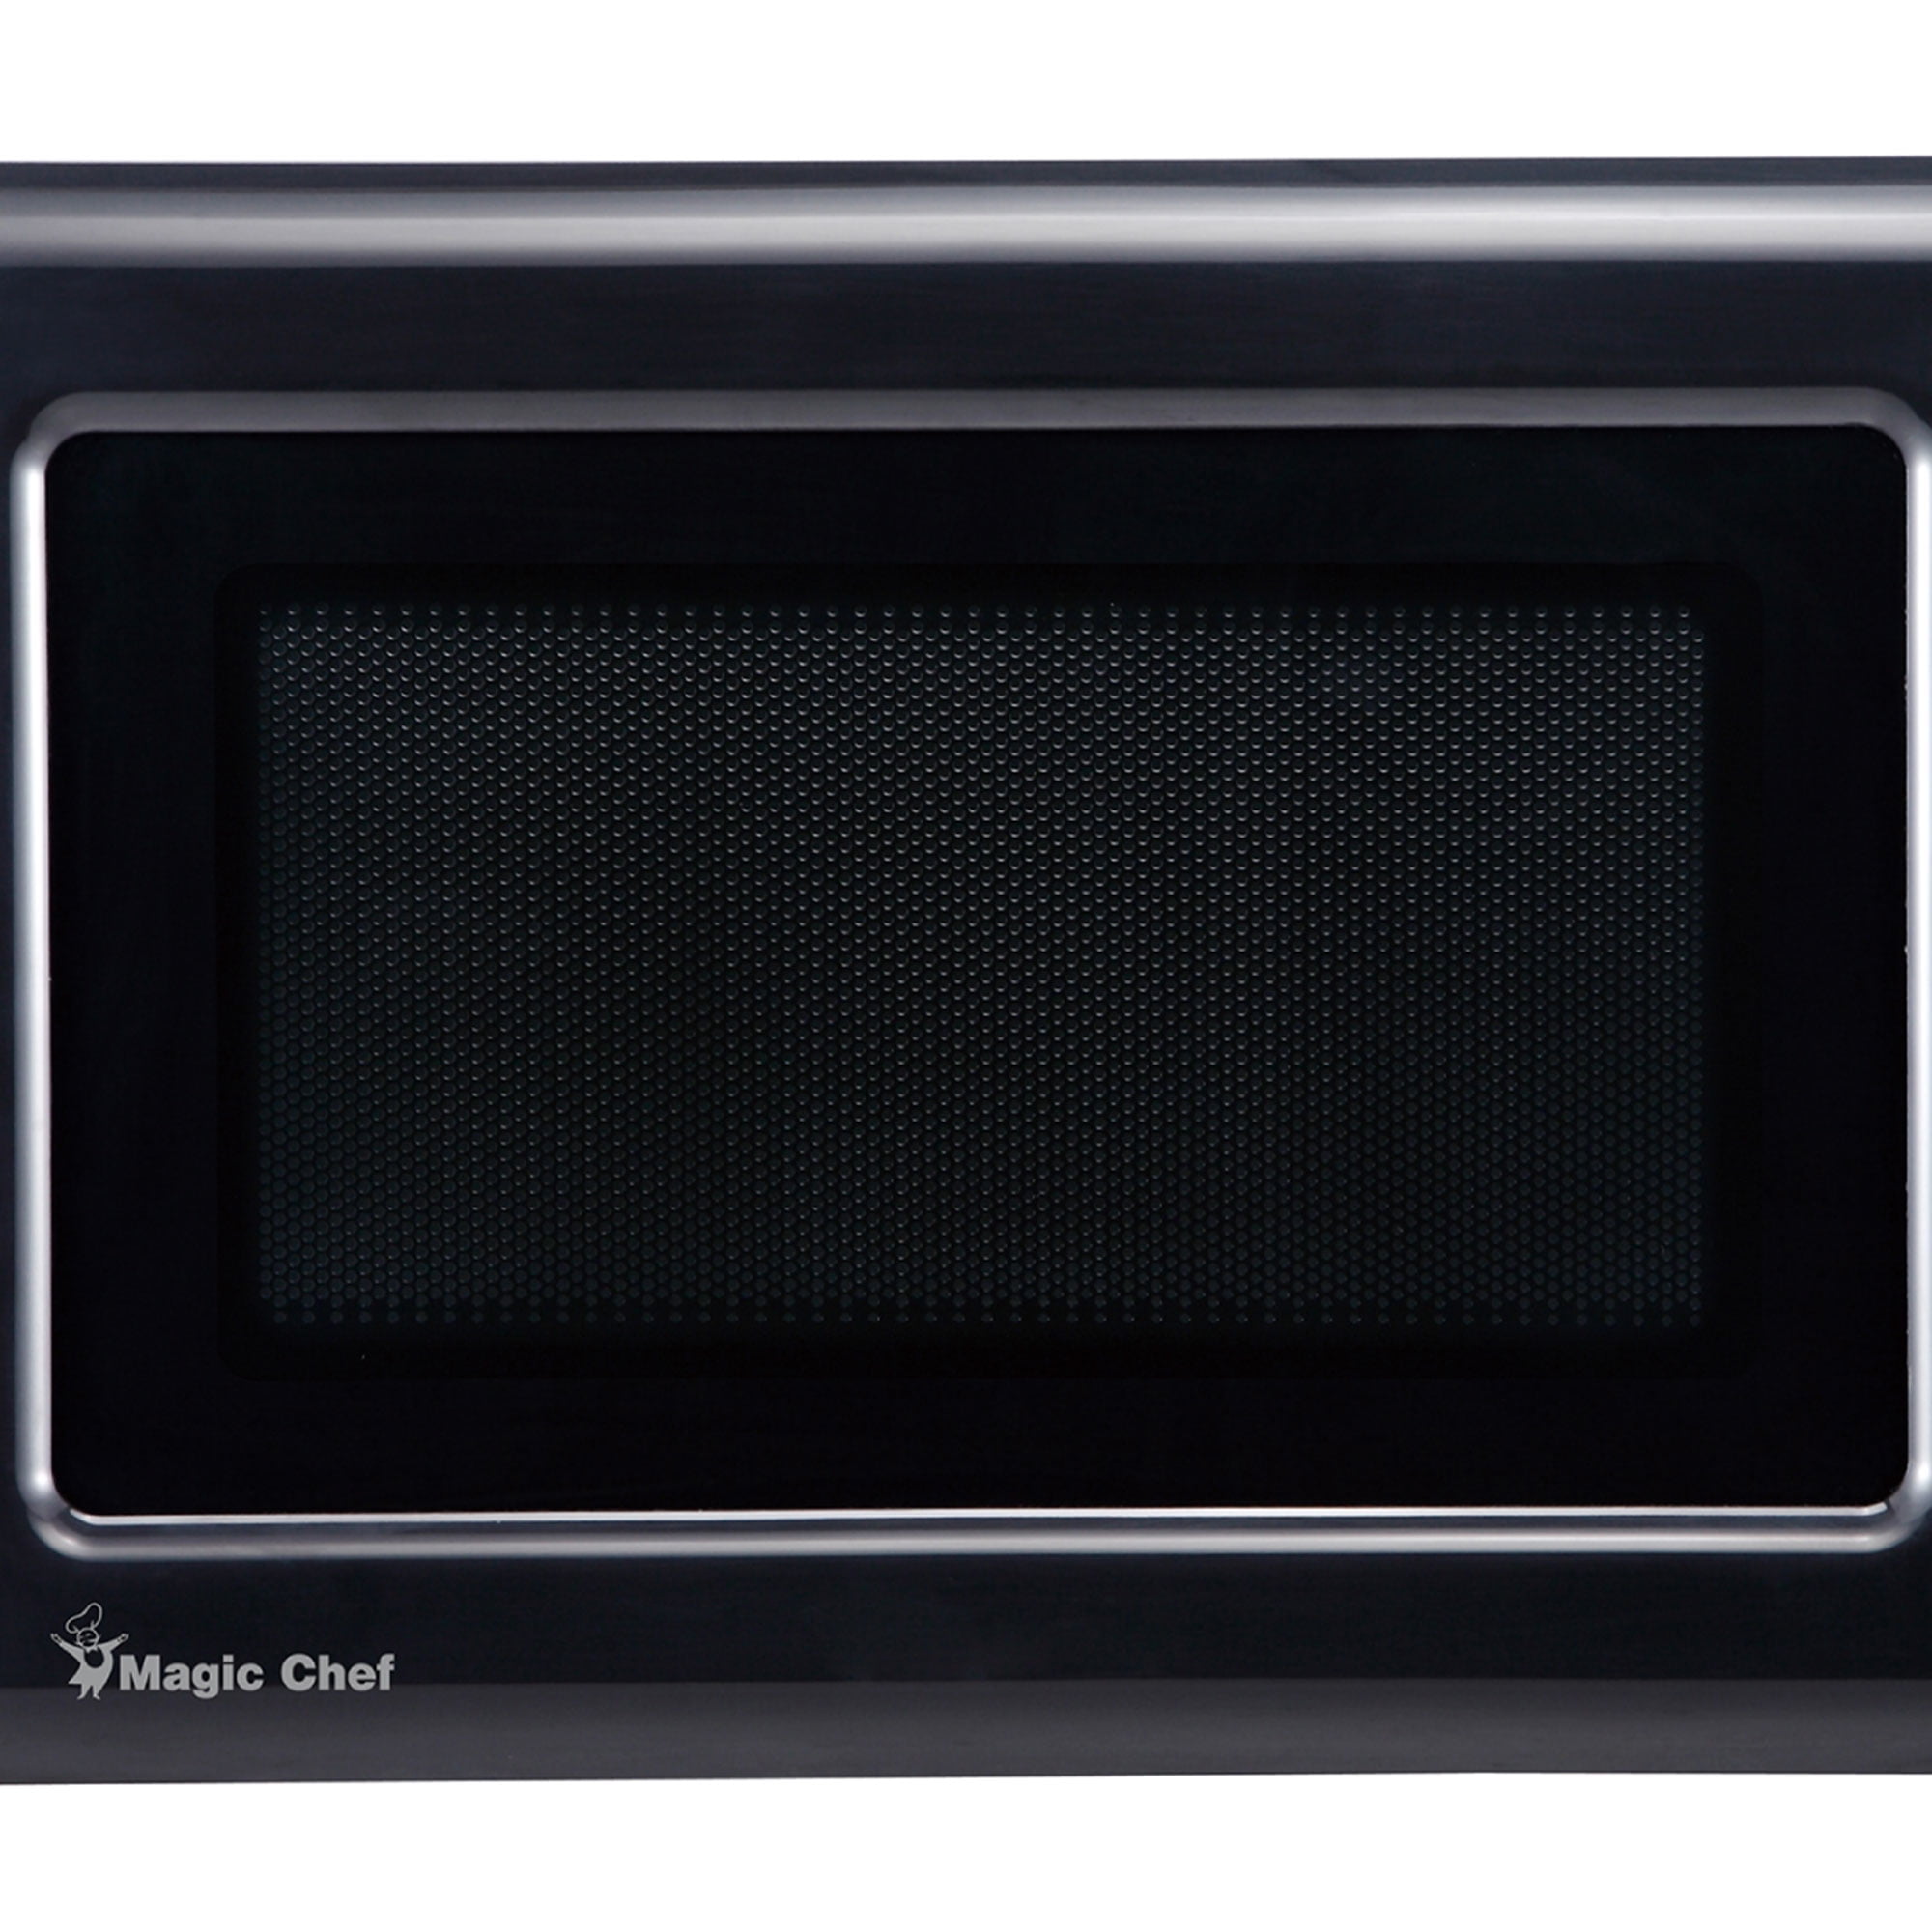 Muave' small microwave 17.3 w x 10.2 h x 13.deep - ideal for boats